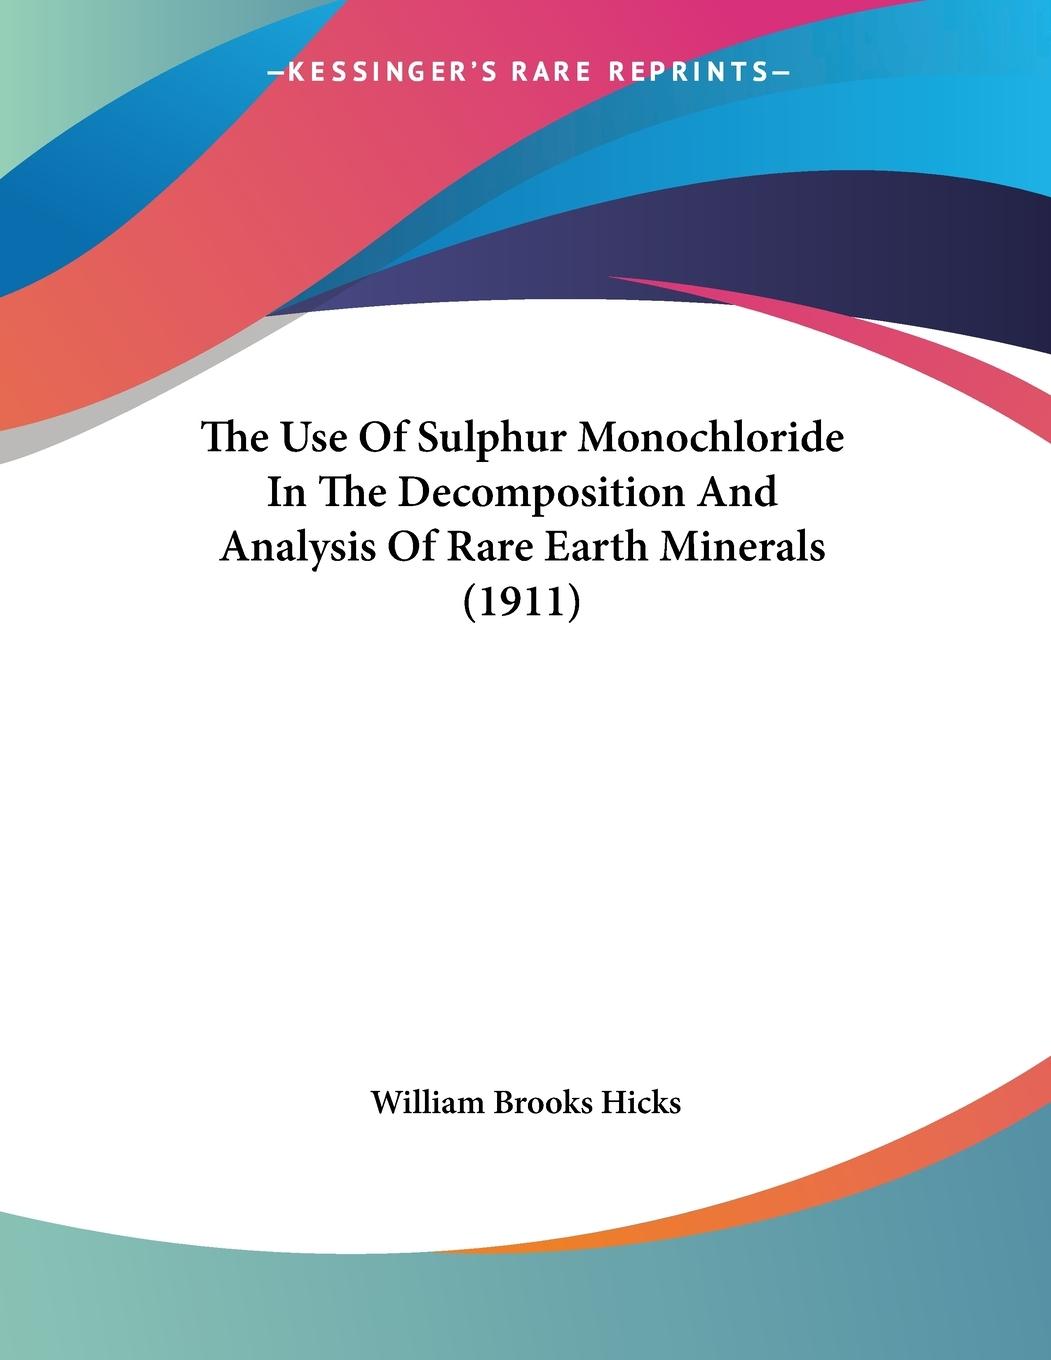 The Use Of Sulphur Monochloride In The Decomposition And Analysis Of Rare Earth Minerals (1911) - Hicks, William Brooks